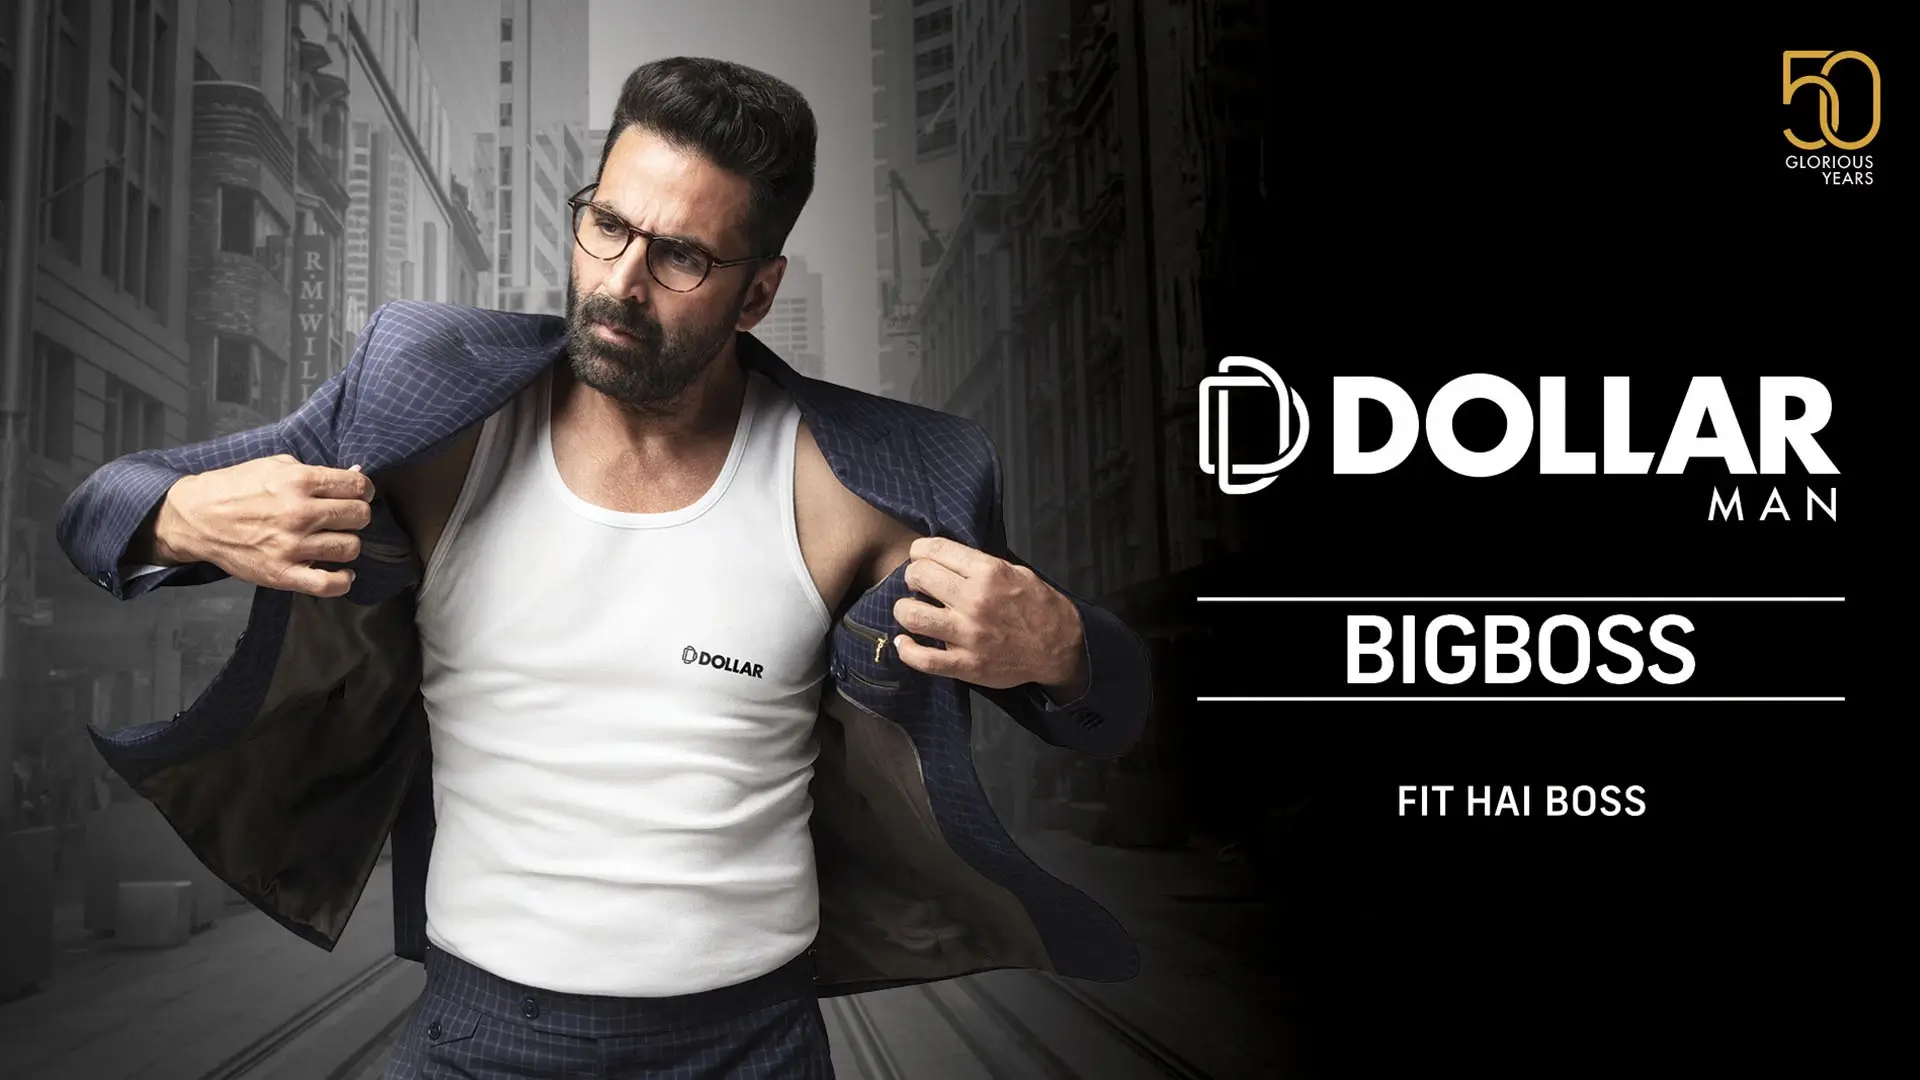 Dollar Bigboss - #Free Handkerchief With Two Pieces Of #DollarBigboss RN  Vest Available @ Your Nearest #RetailOutlet This #Offer is not valid on  e-commerce i.e. online purchase. #Apparel #Scheme #SpecialOffer #FitHaiBoss  Akshay